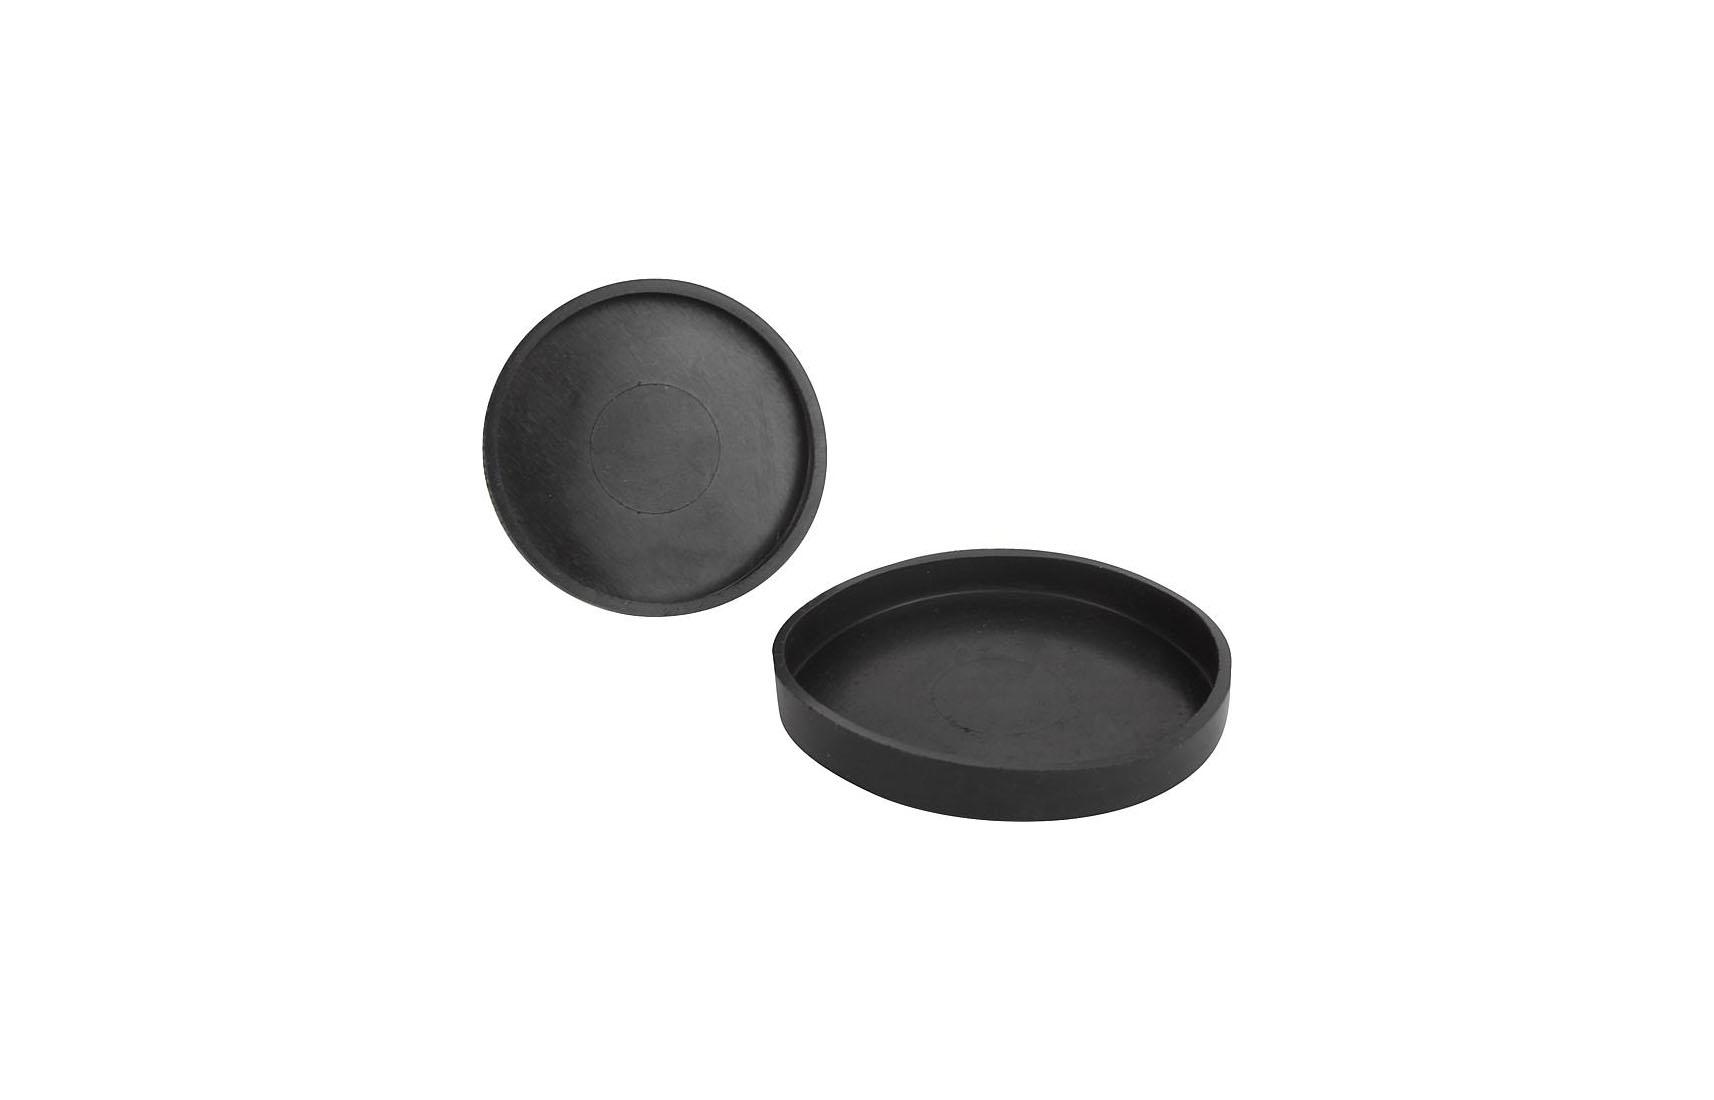 K0561_Protective rubber caps for shallow pot magnets